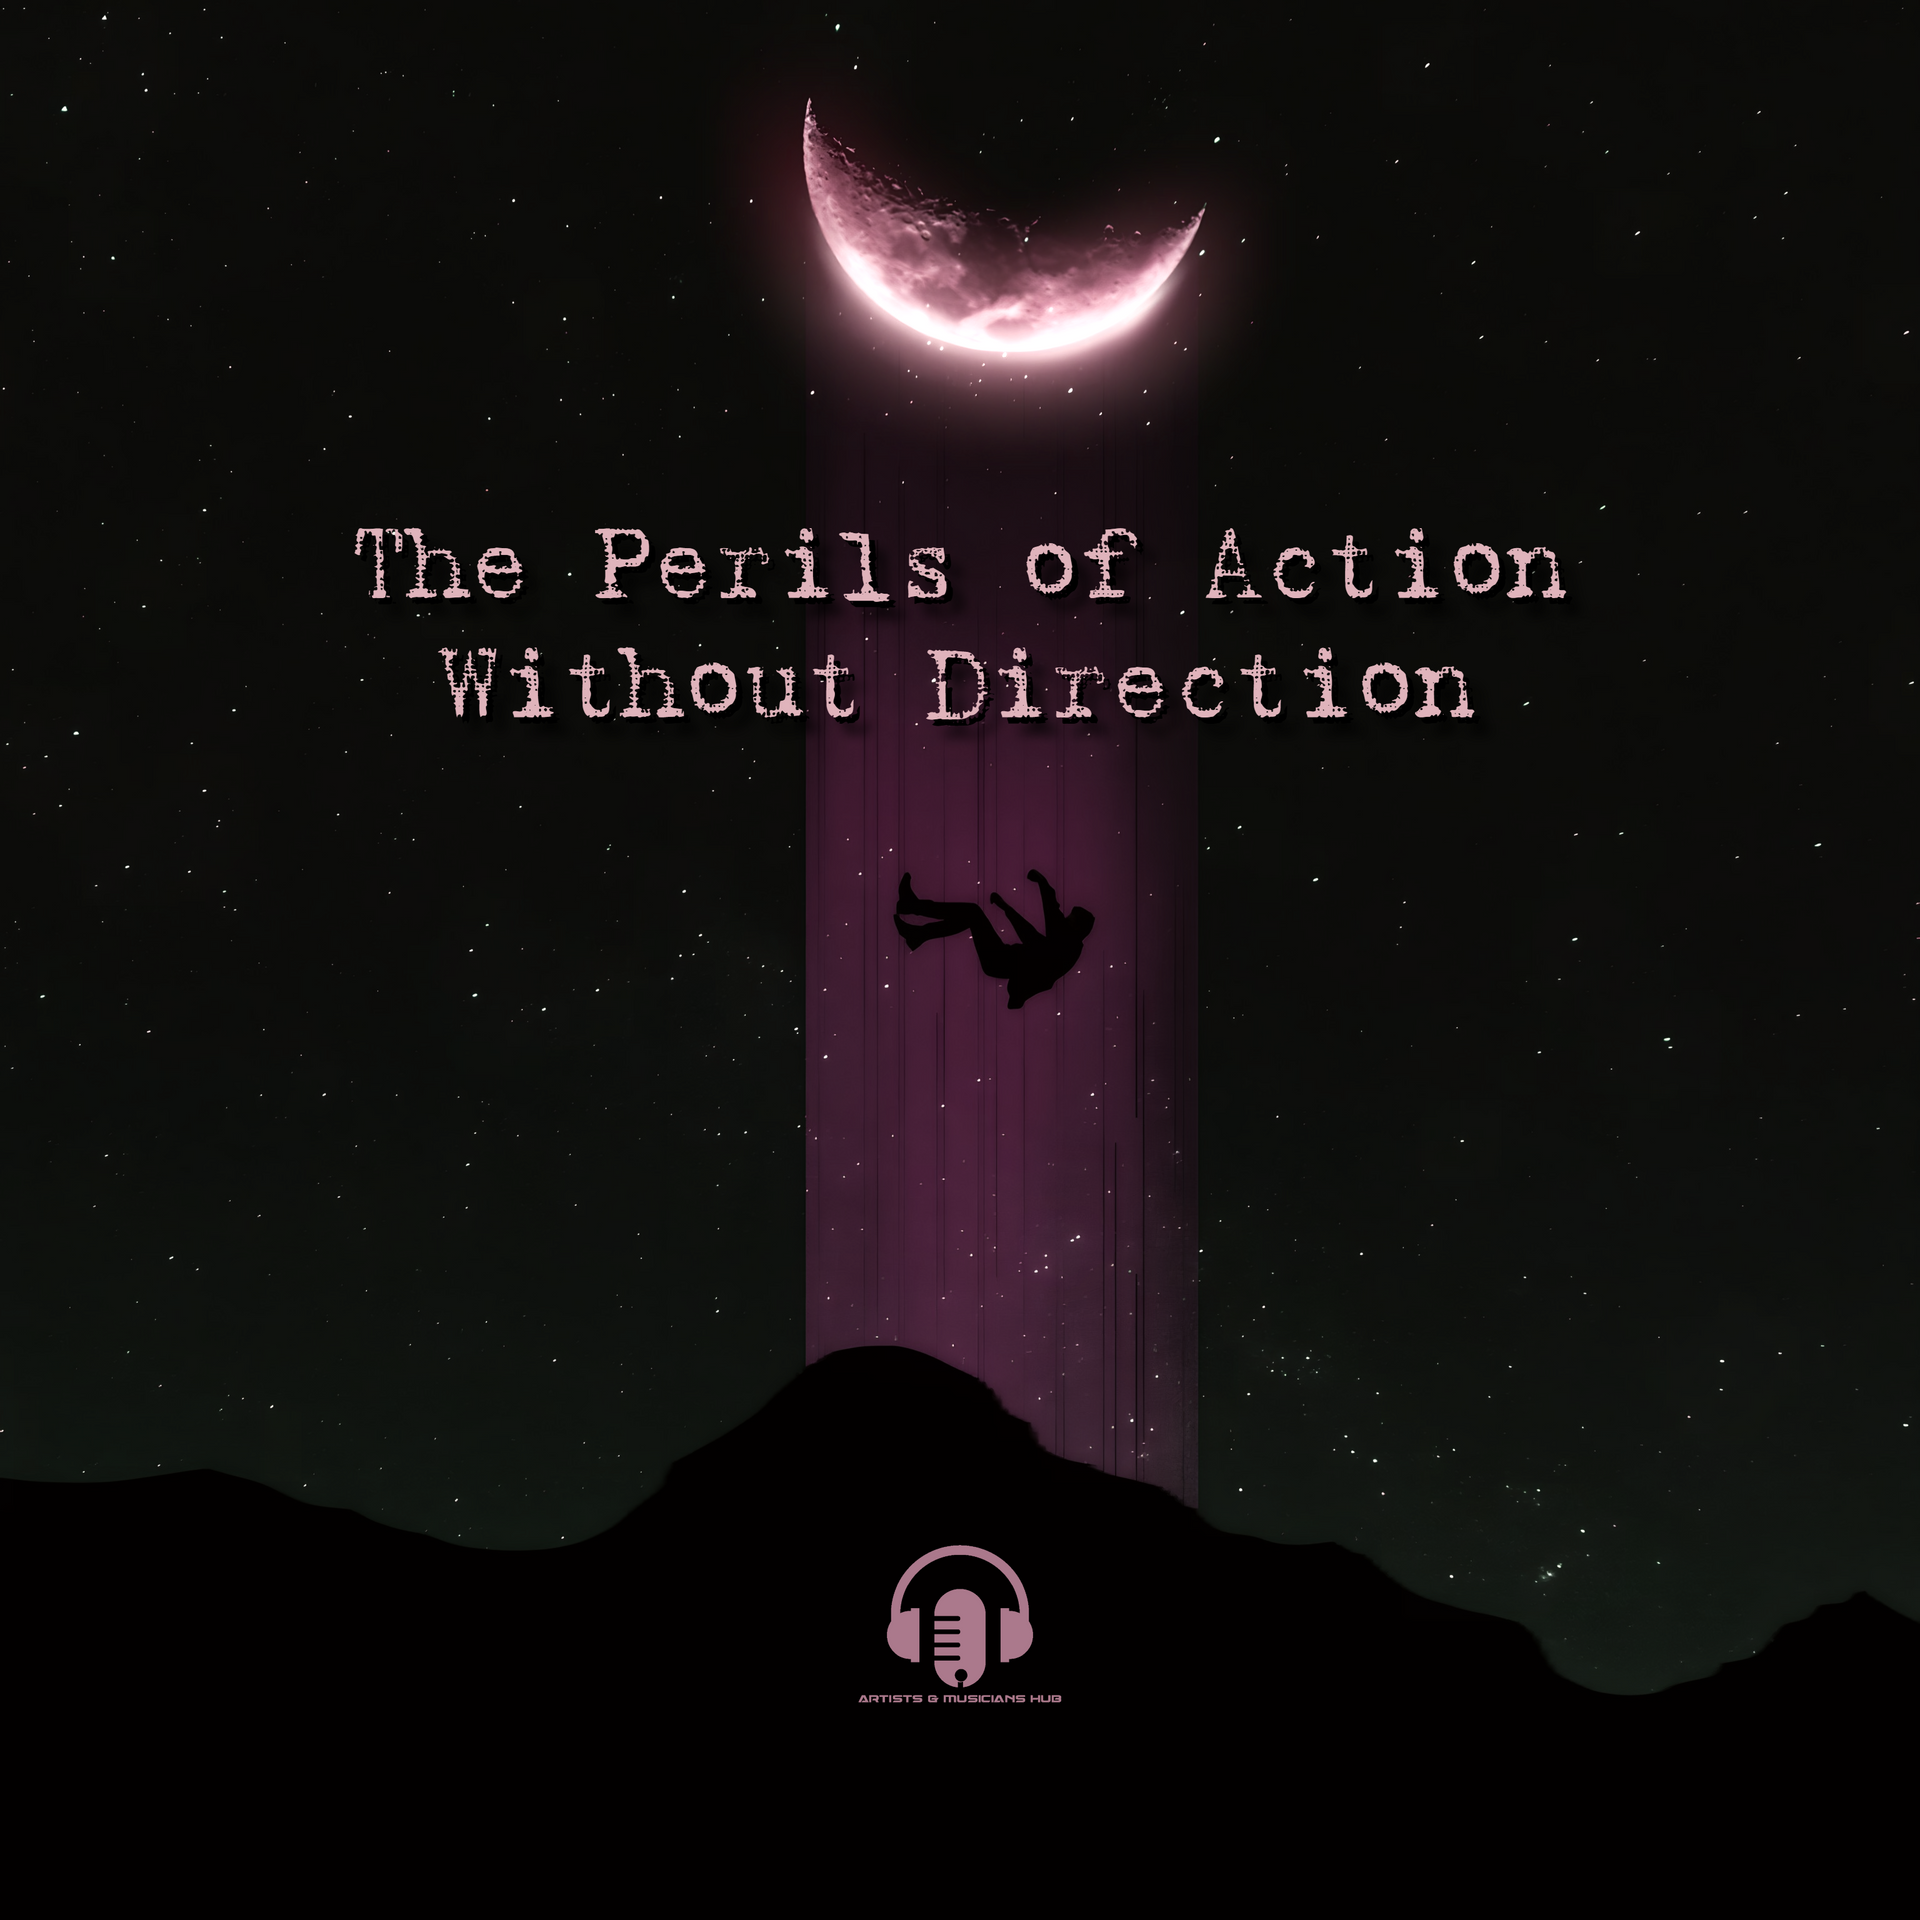 The Perils of Action Without Direction